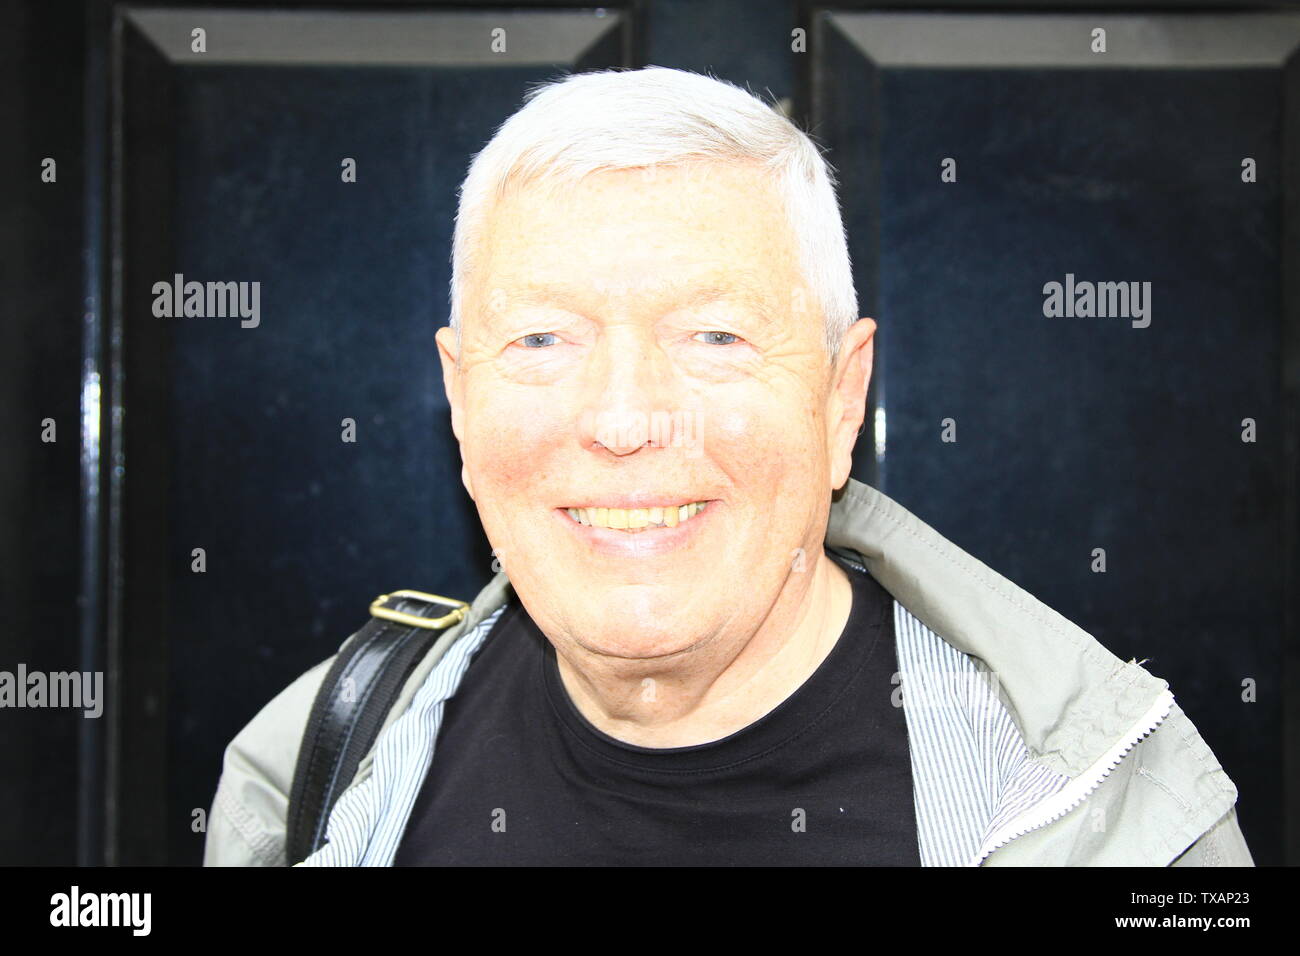 ALAN JOHNSON PICTURED IN THE CITY OF WESTMINSTER ON 24TH JUNE 2019. BRITISH POLITICIANS . UK POLITICS. LABOUR PARTY MPS. SERVED IN TONY BLAIR GOVERNMENT. GORDON BROWN GOVERNMENT.SHADOW CHANCELLOR OF THE EXCHEQUER. See Russell Moore portfolio page. Stock Photo